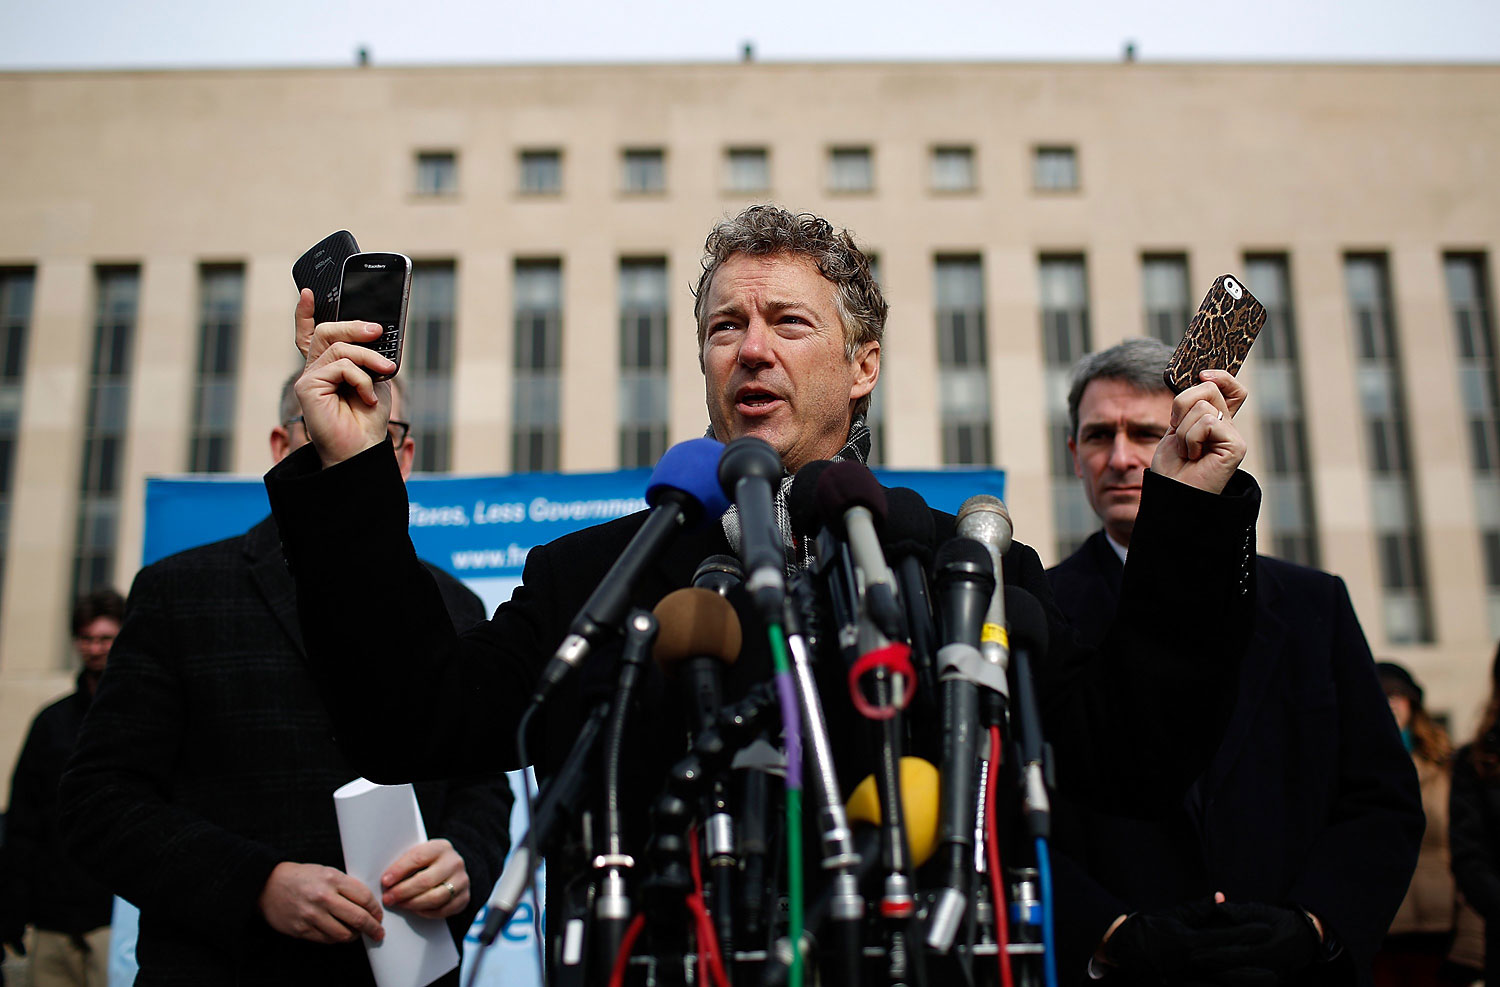 Sen. Rand Paul holds up a group of cell phones in front of U.S. District Court to announce the filing of a class action lawsuit against the administration of U.S. President Barack Obama, Feb. 12. 2014. (Win McNamee&amp;mdash;Getty Images)